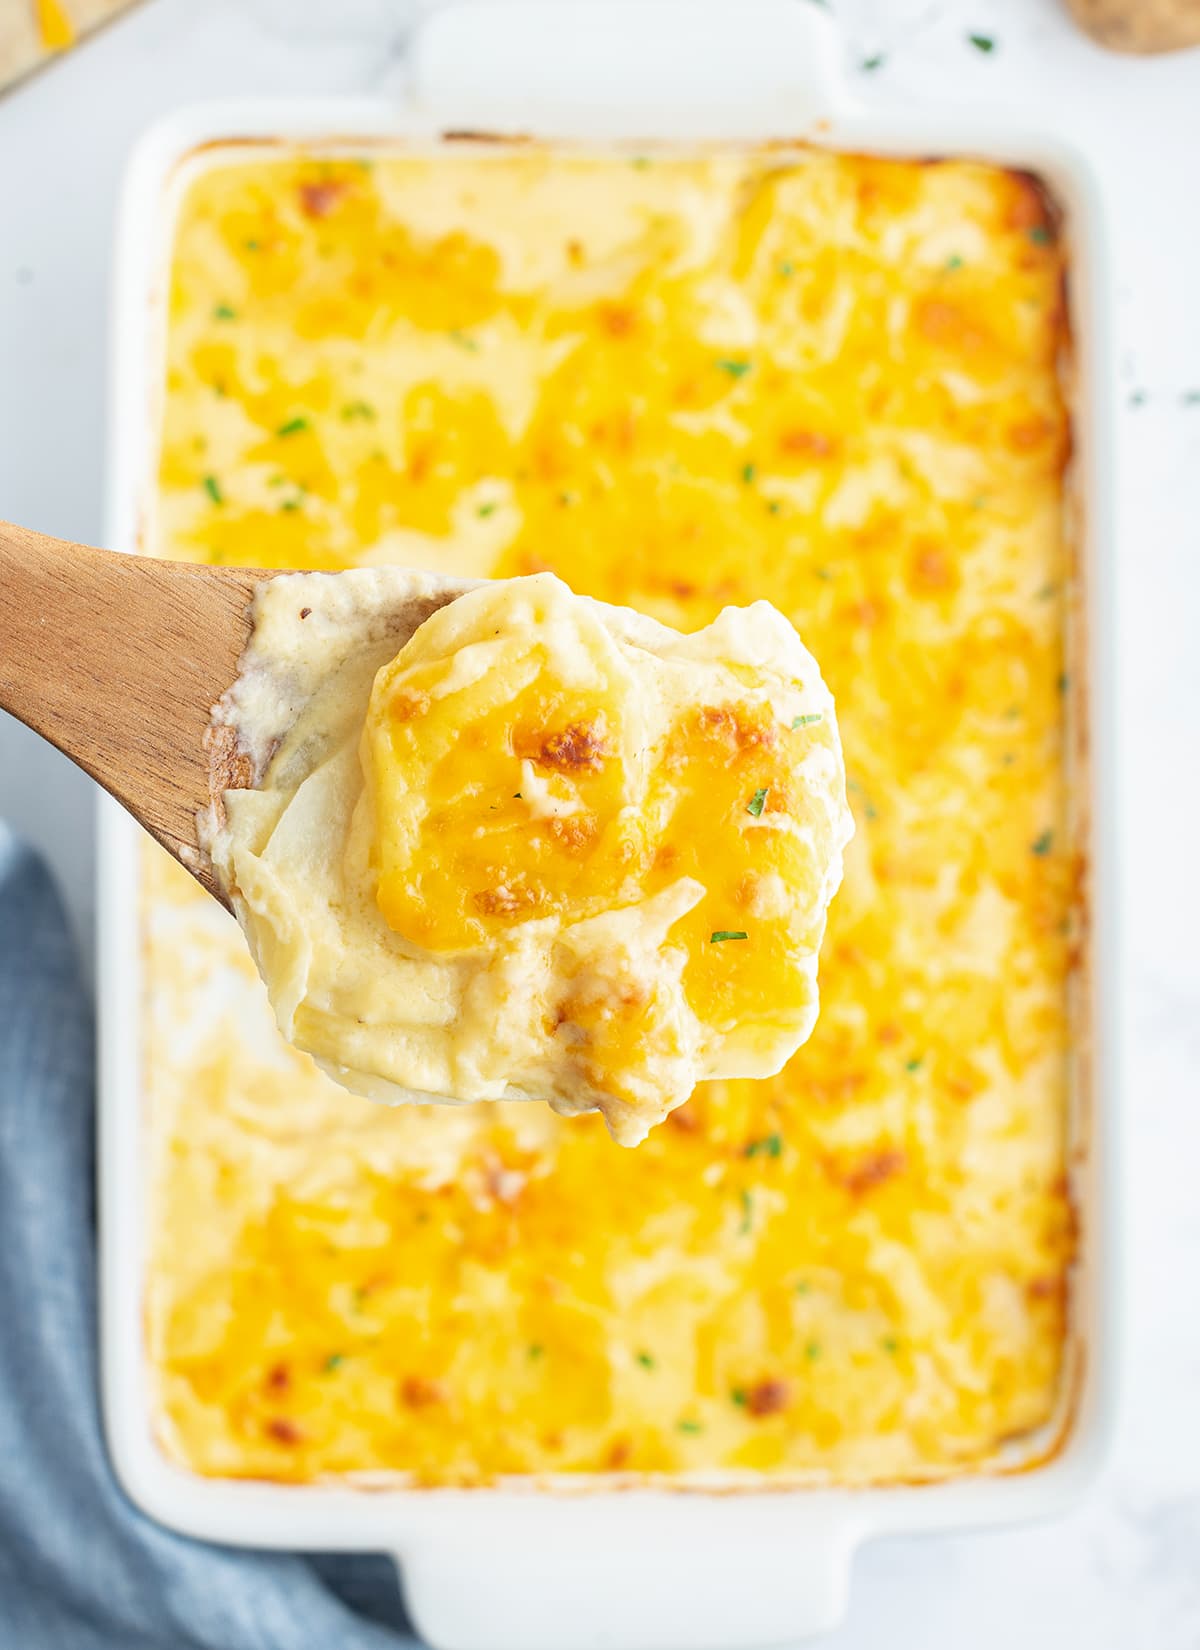 A spoonful of scalloped potatoes being held above a pan of potatoes.